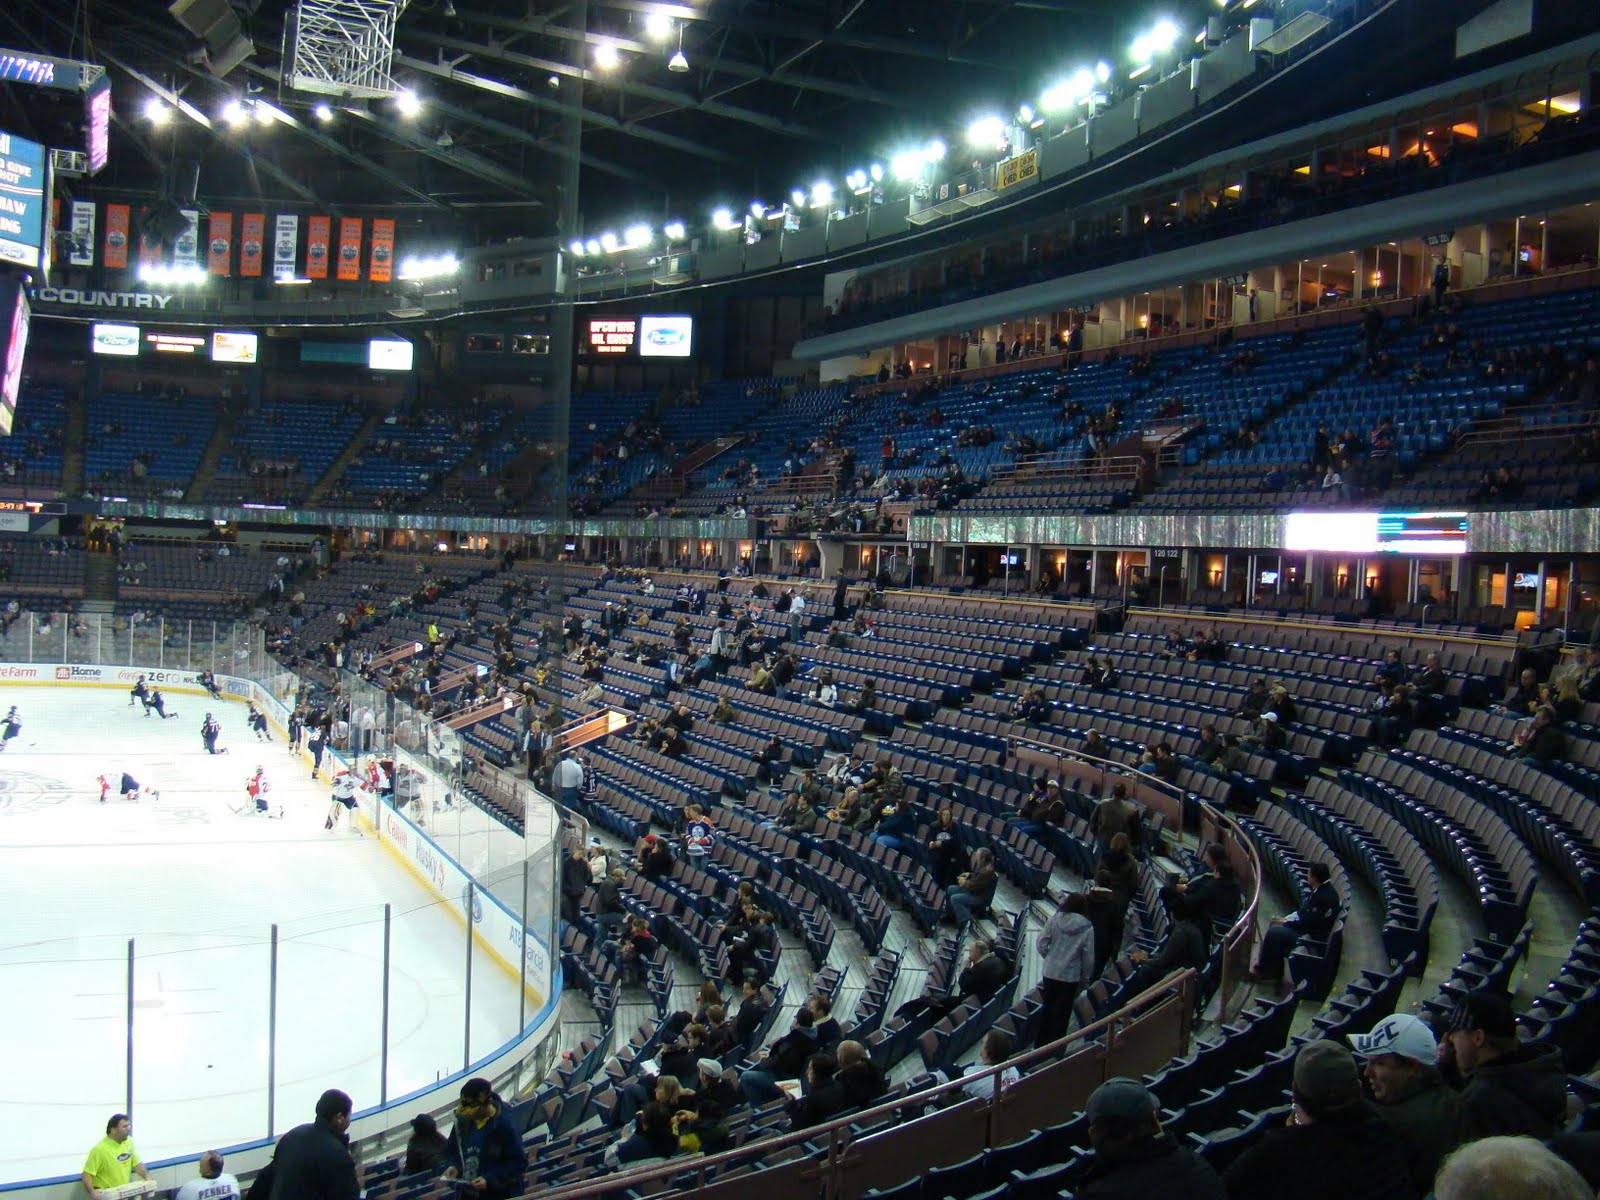 rexall place